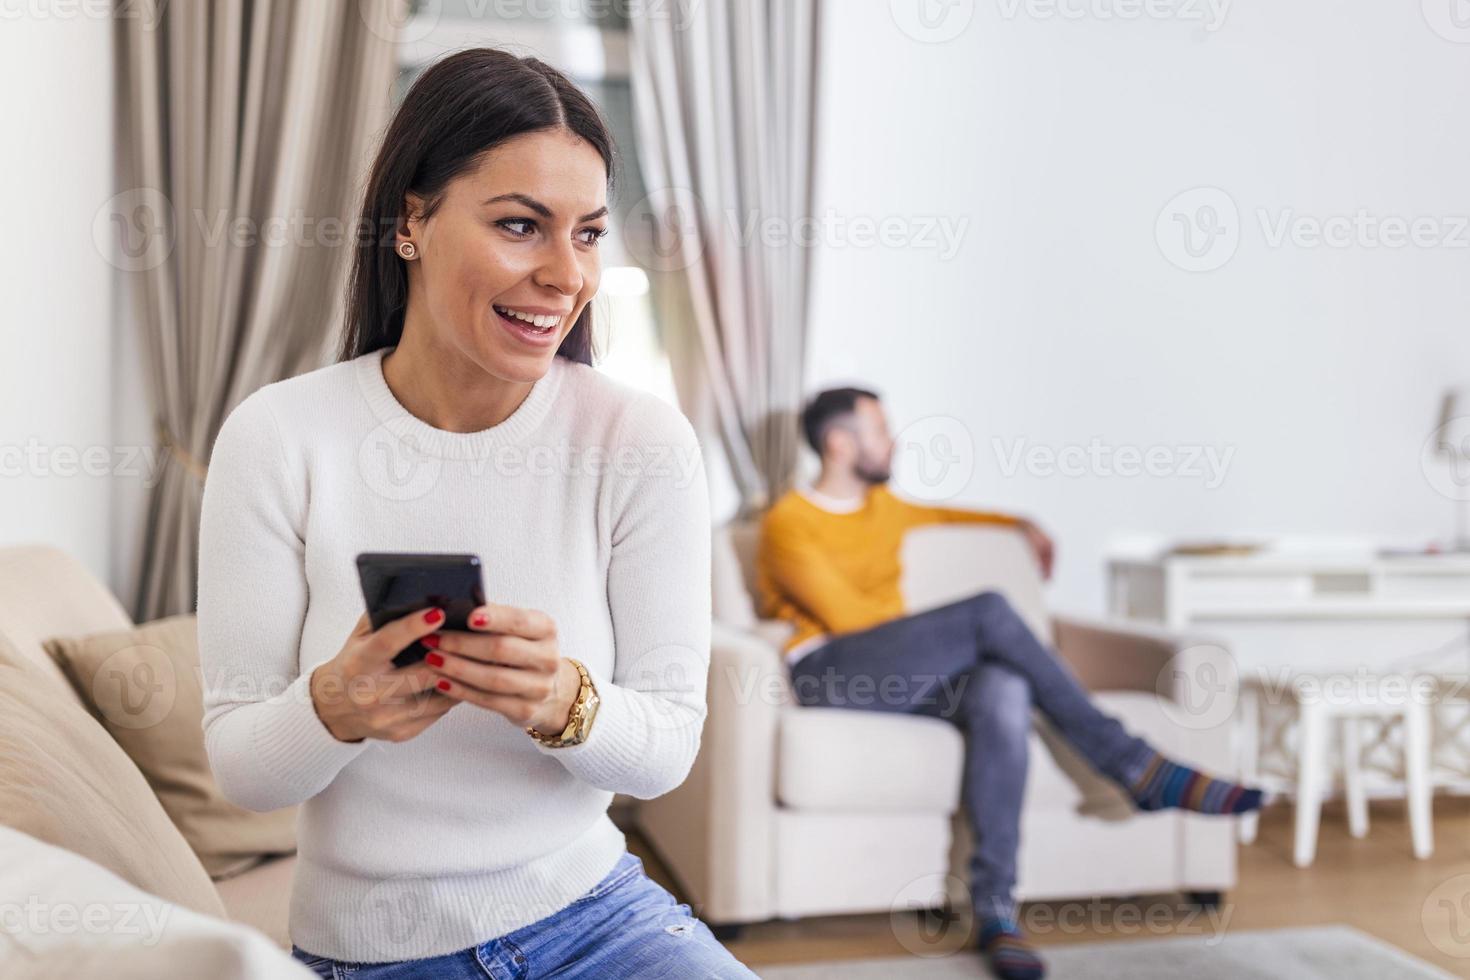 Wife turned her back to husband, reading message on phone from her lover, Man lying on sofa in the back. Cheating and infidelity concept photo